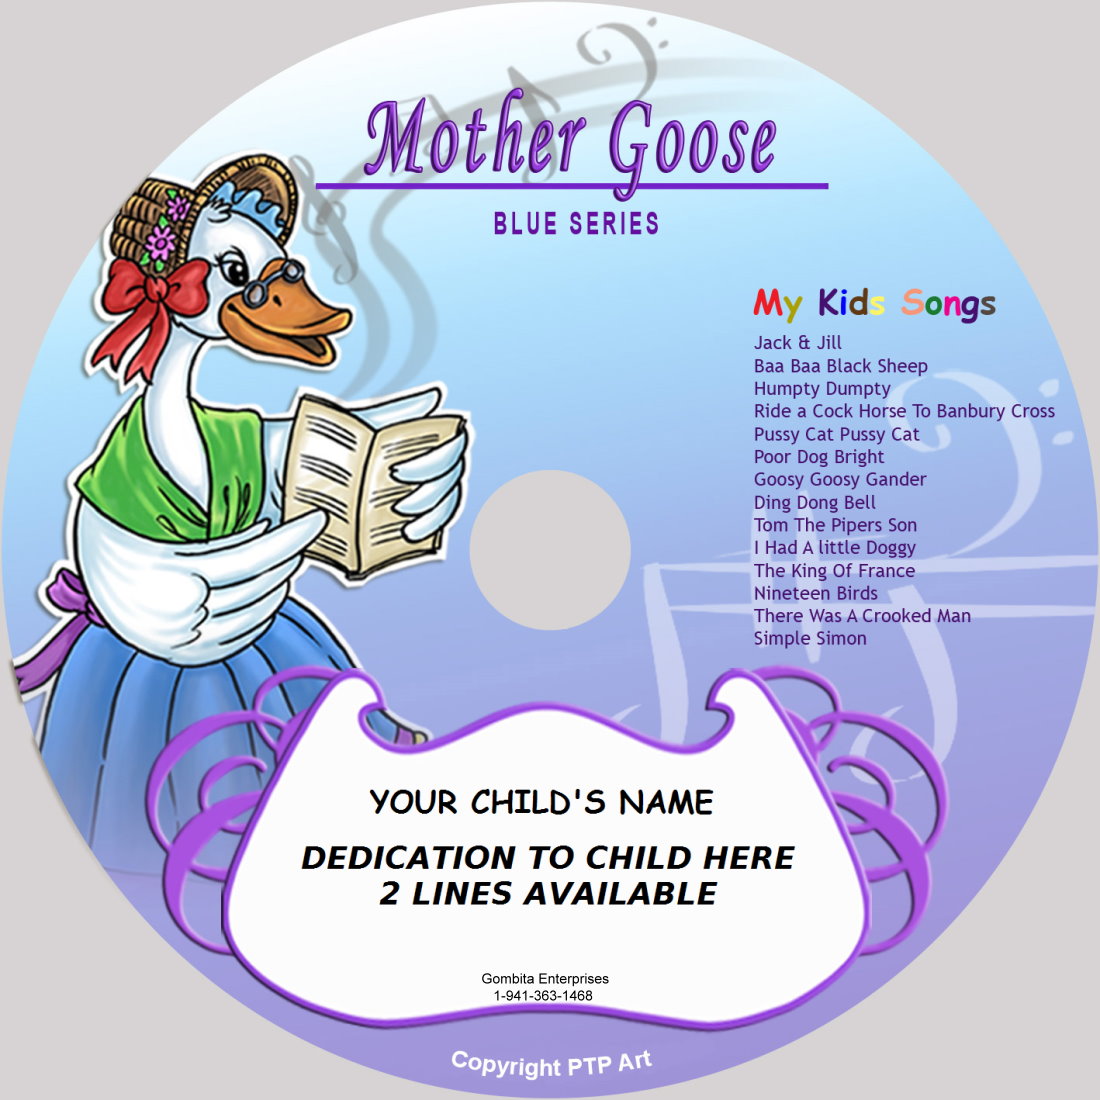 Mother Goose (Blue) - My Kids Songs - MP3 Downloads